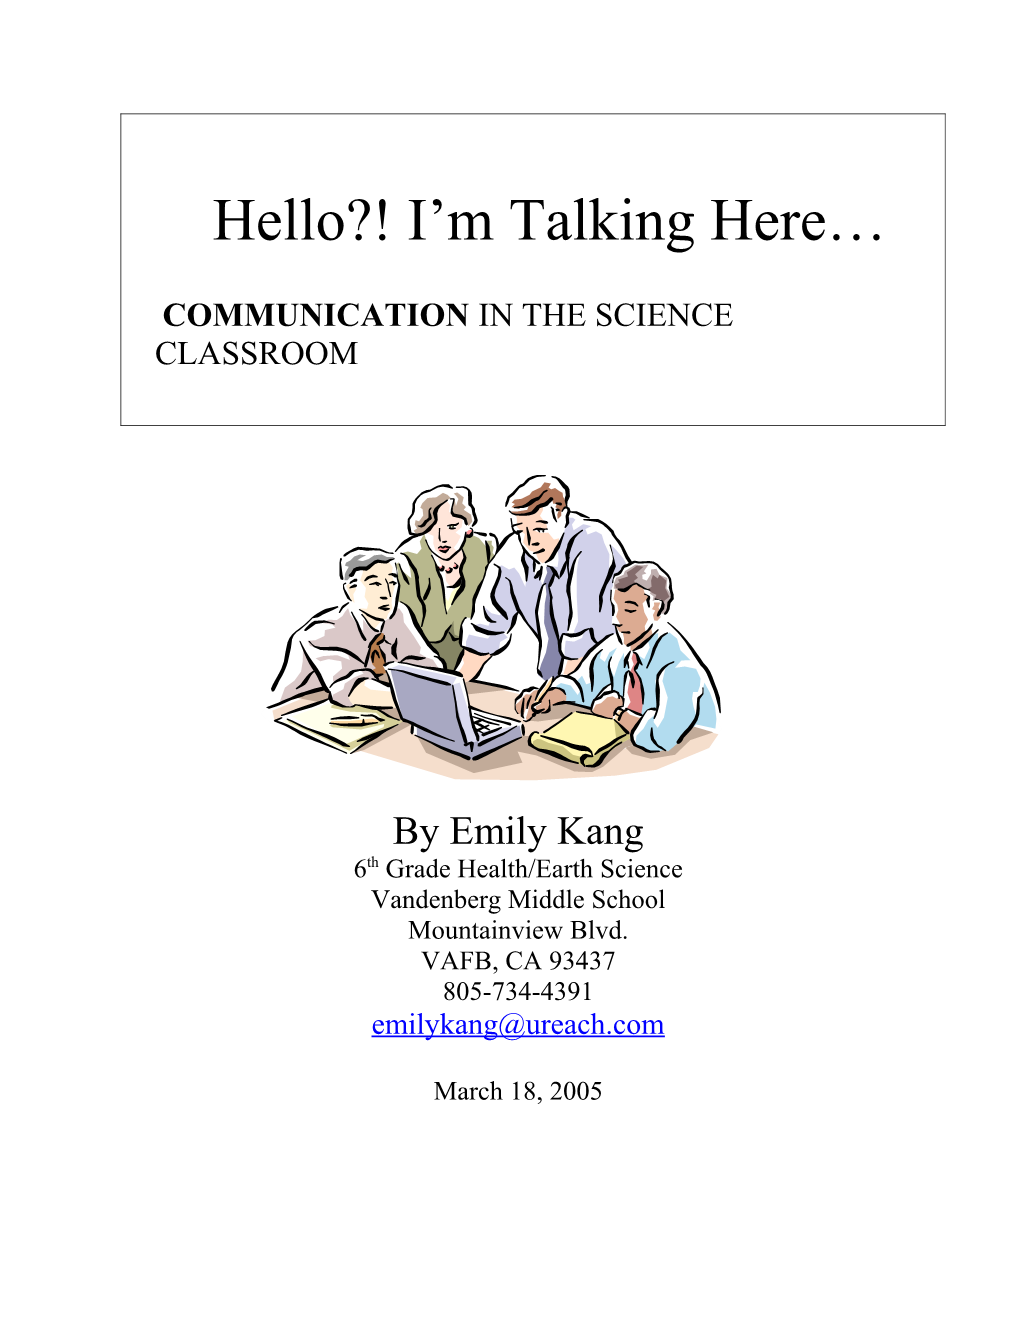 Communication in the Science Classroom